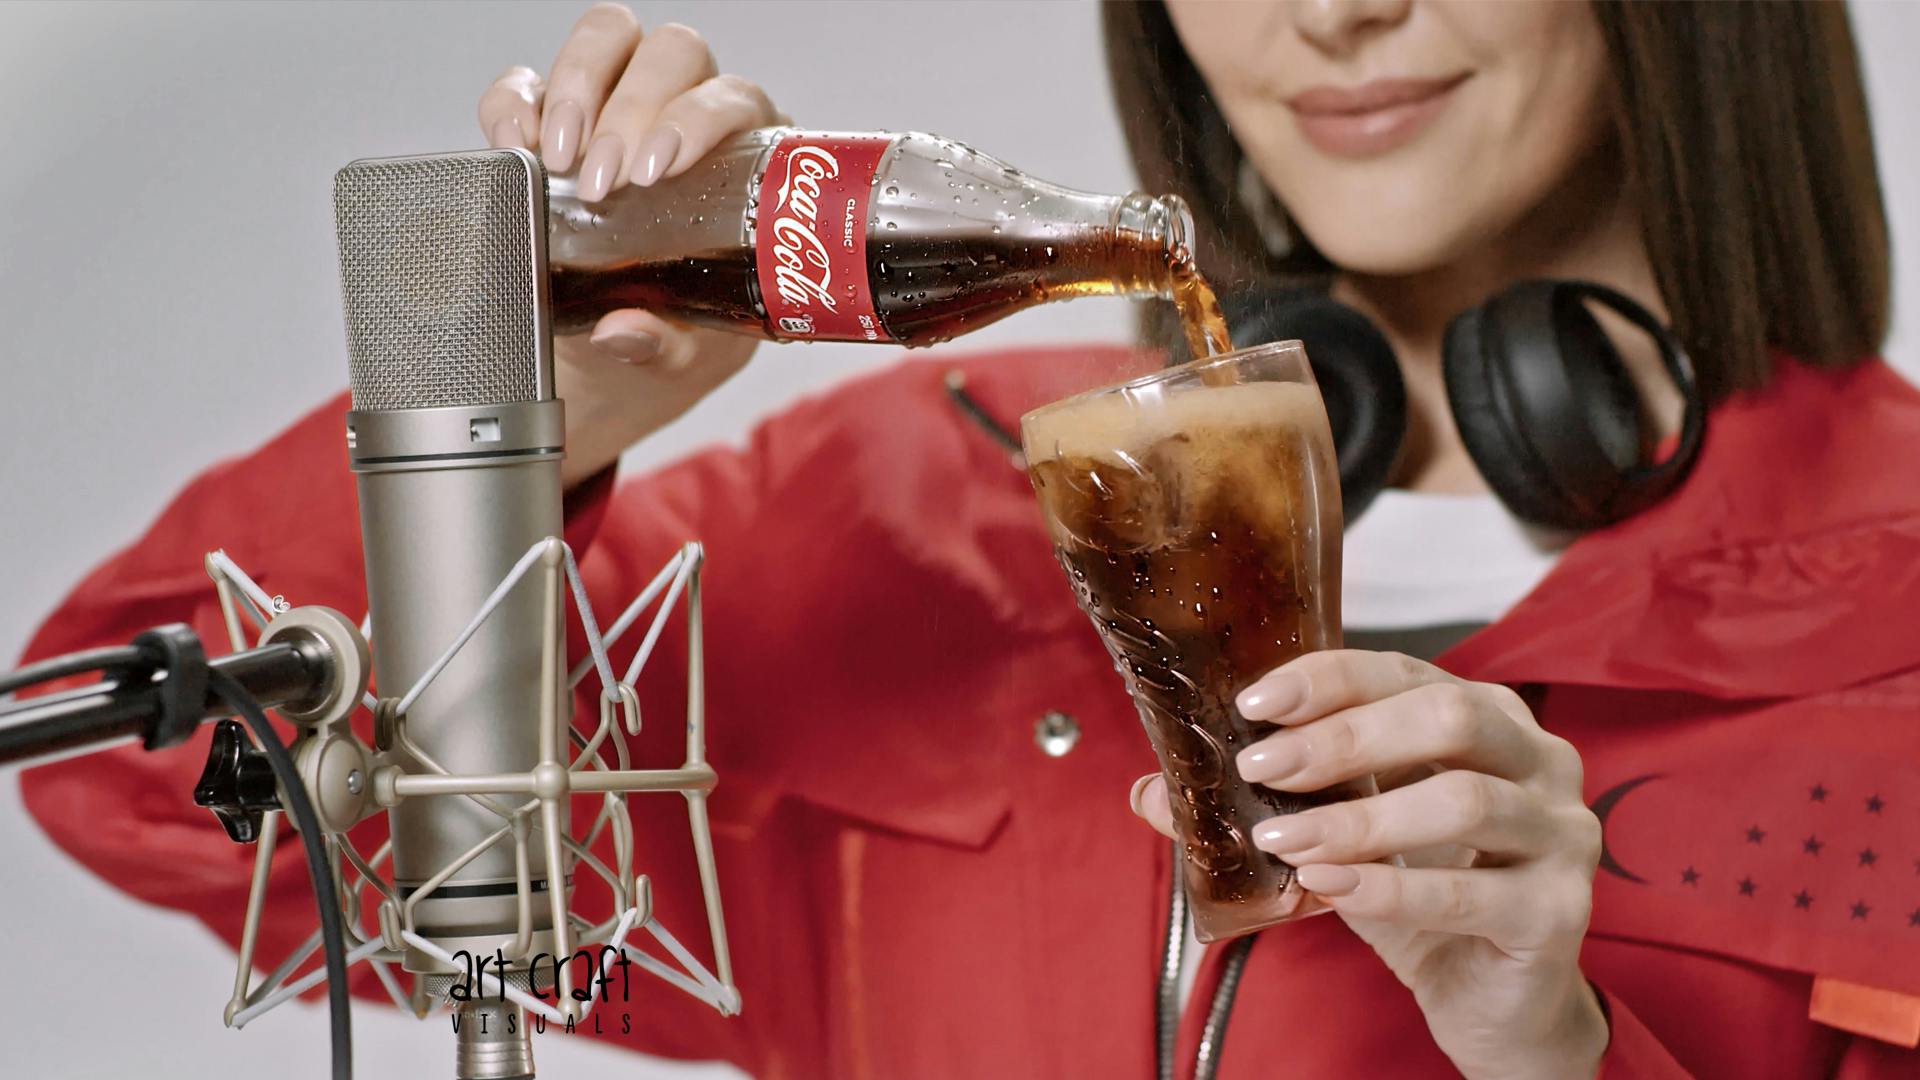 ASMR video for CocaCola